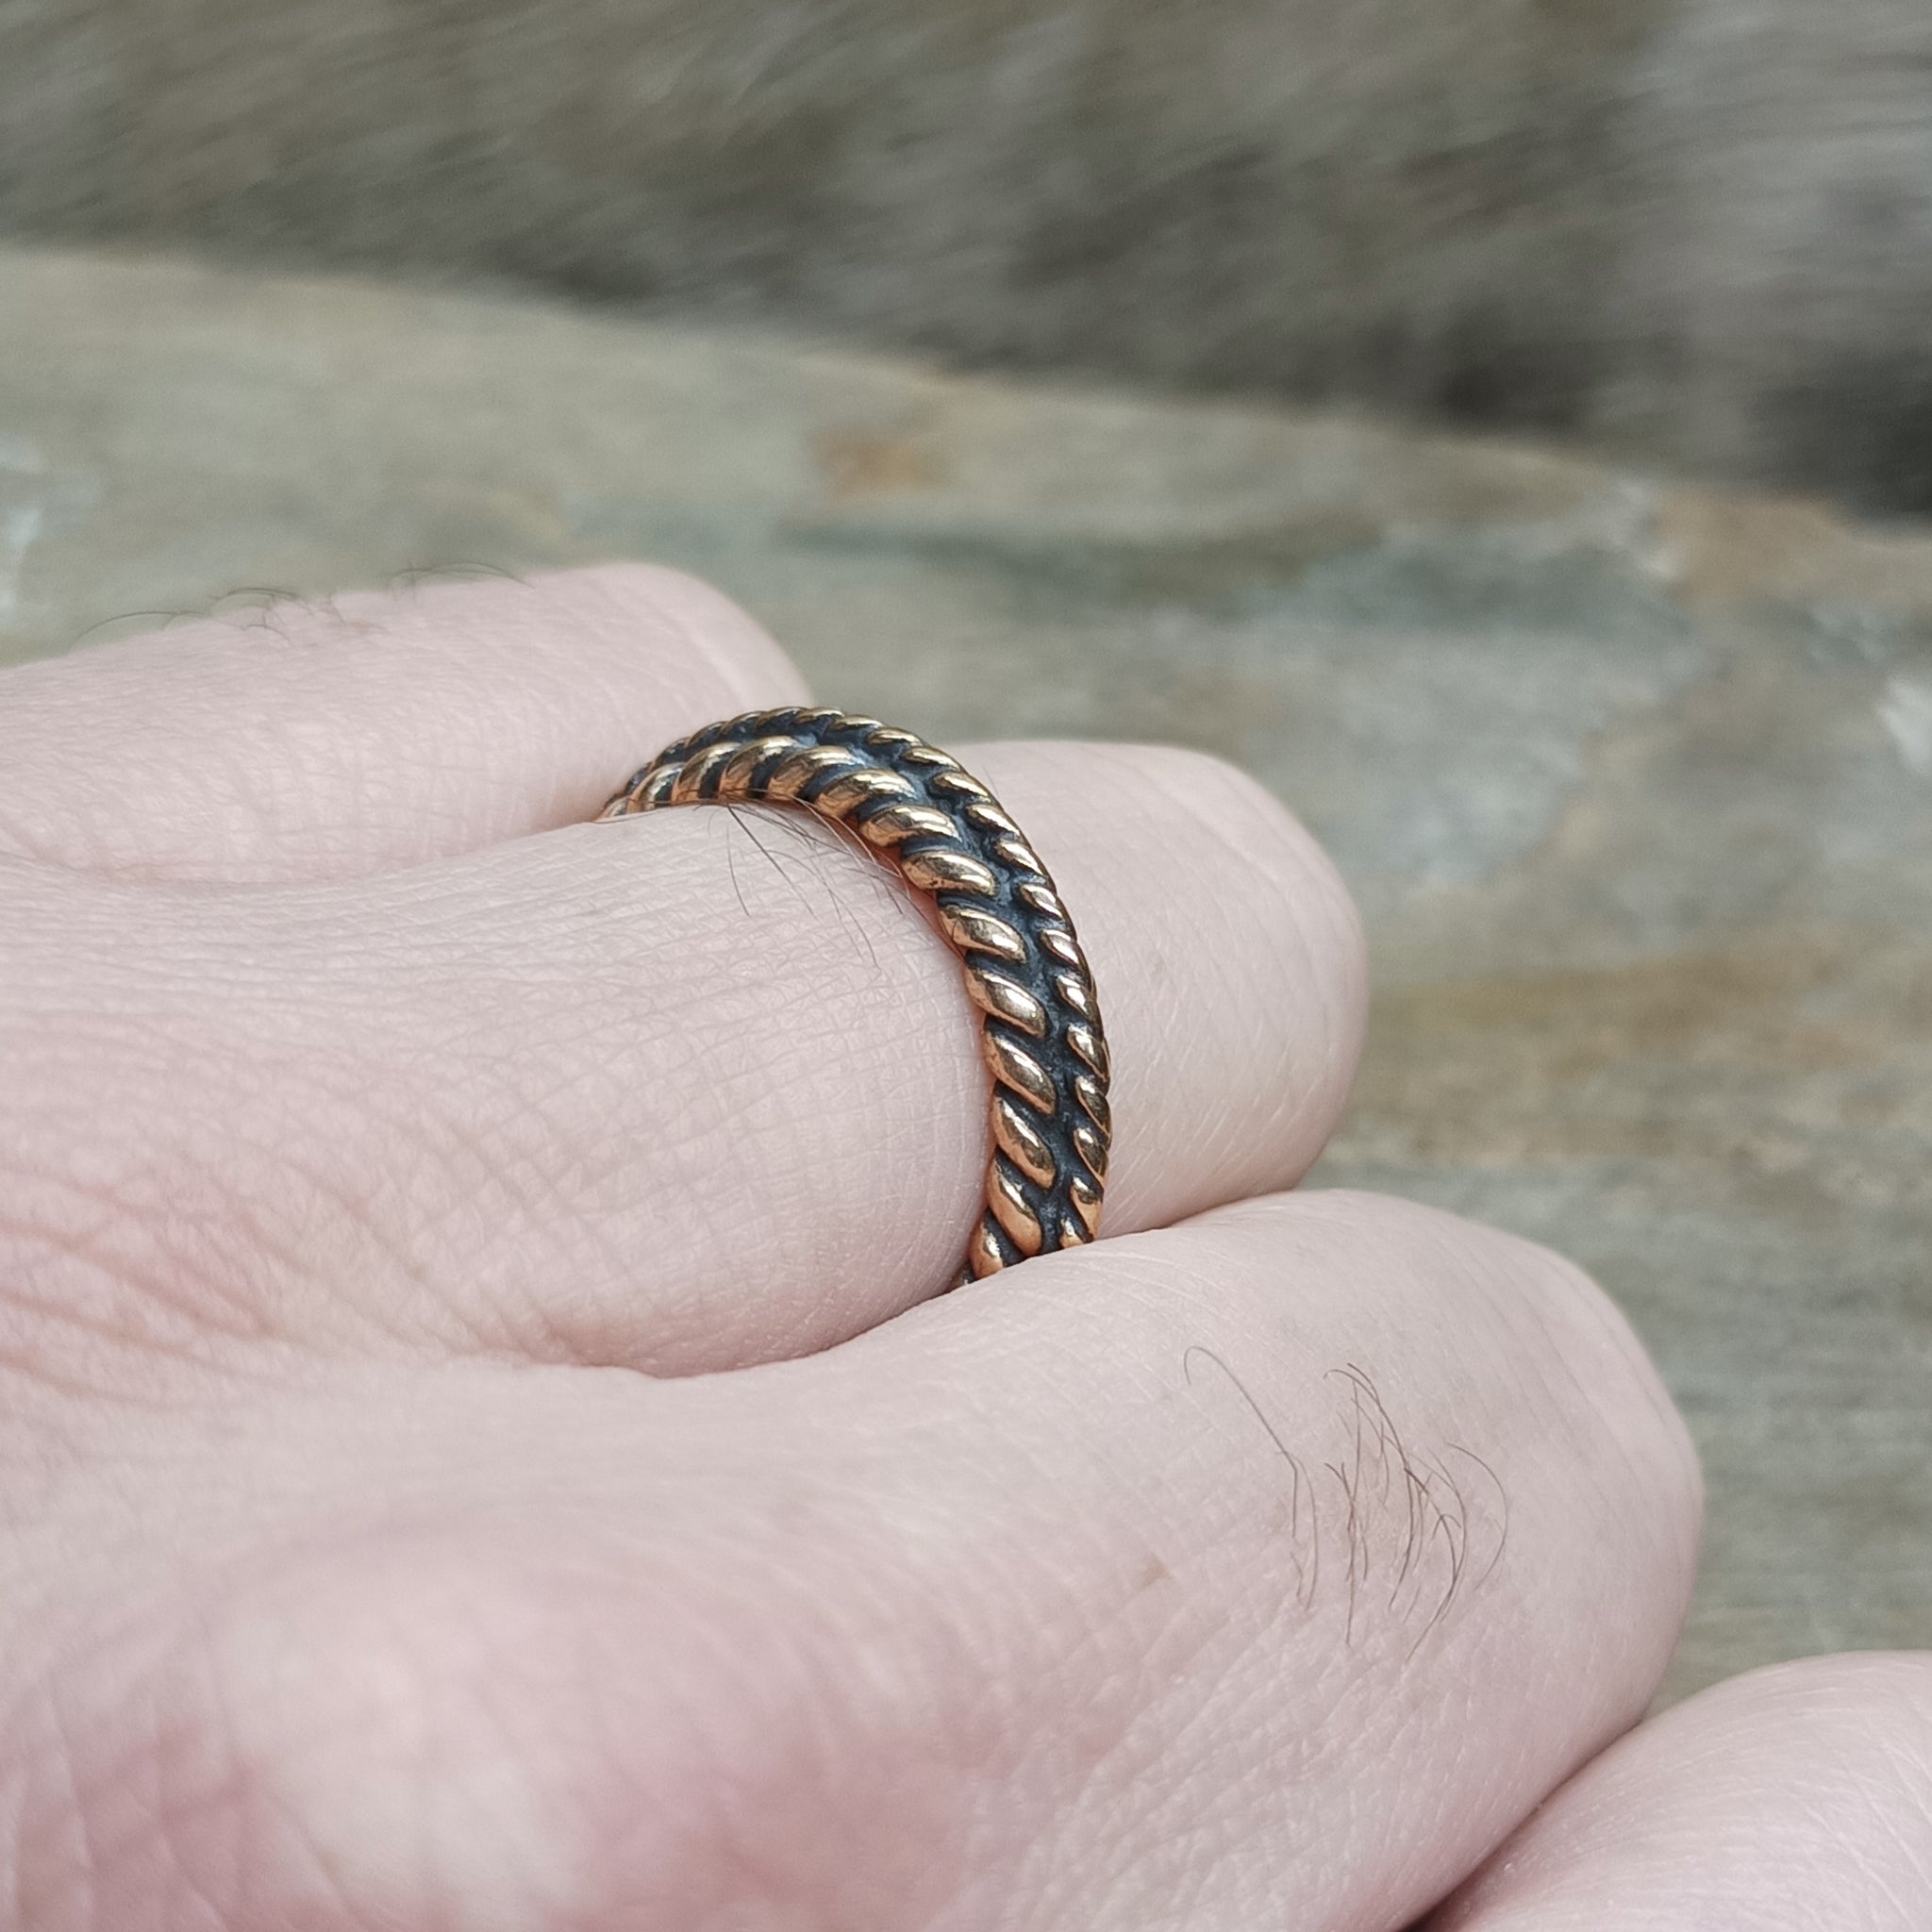 Bronze Braided Viking Ring on Finger - Side Angle View